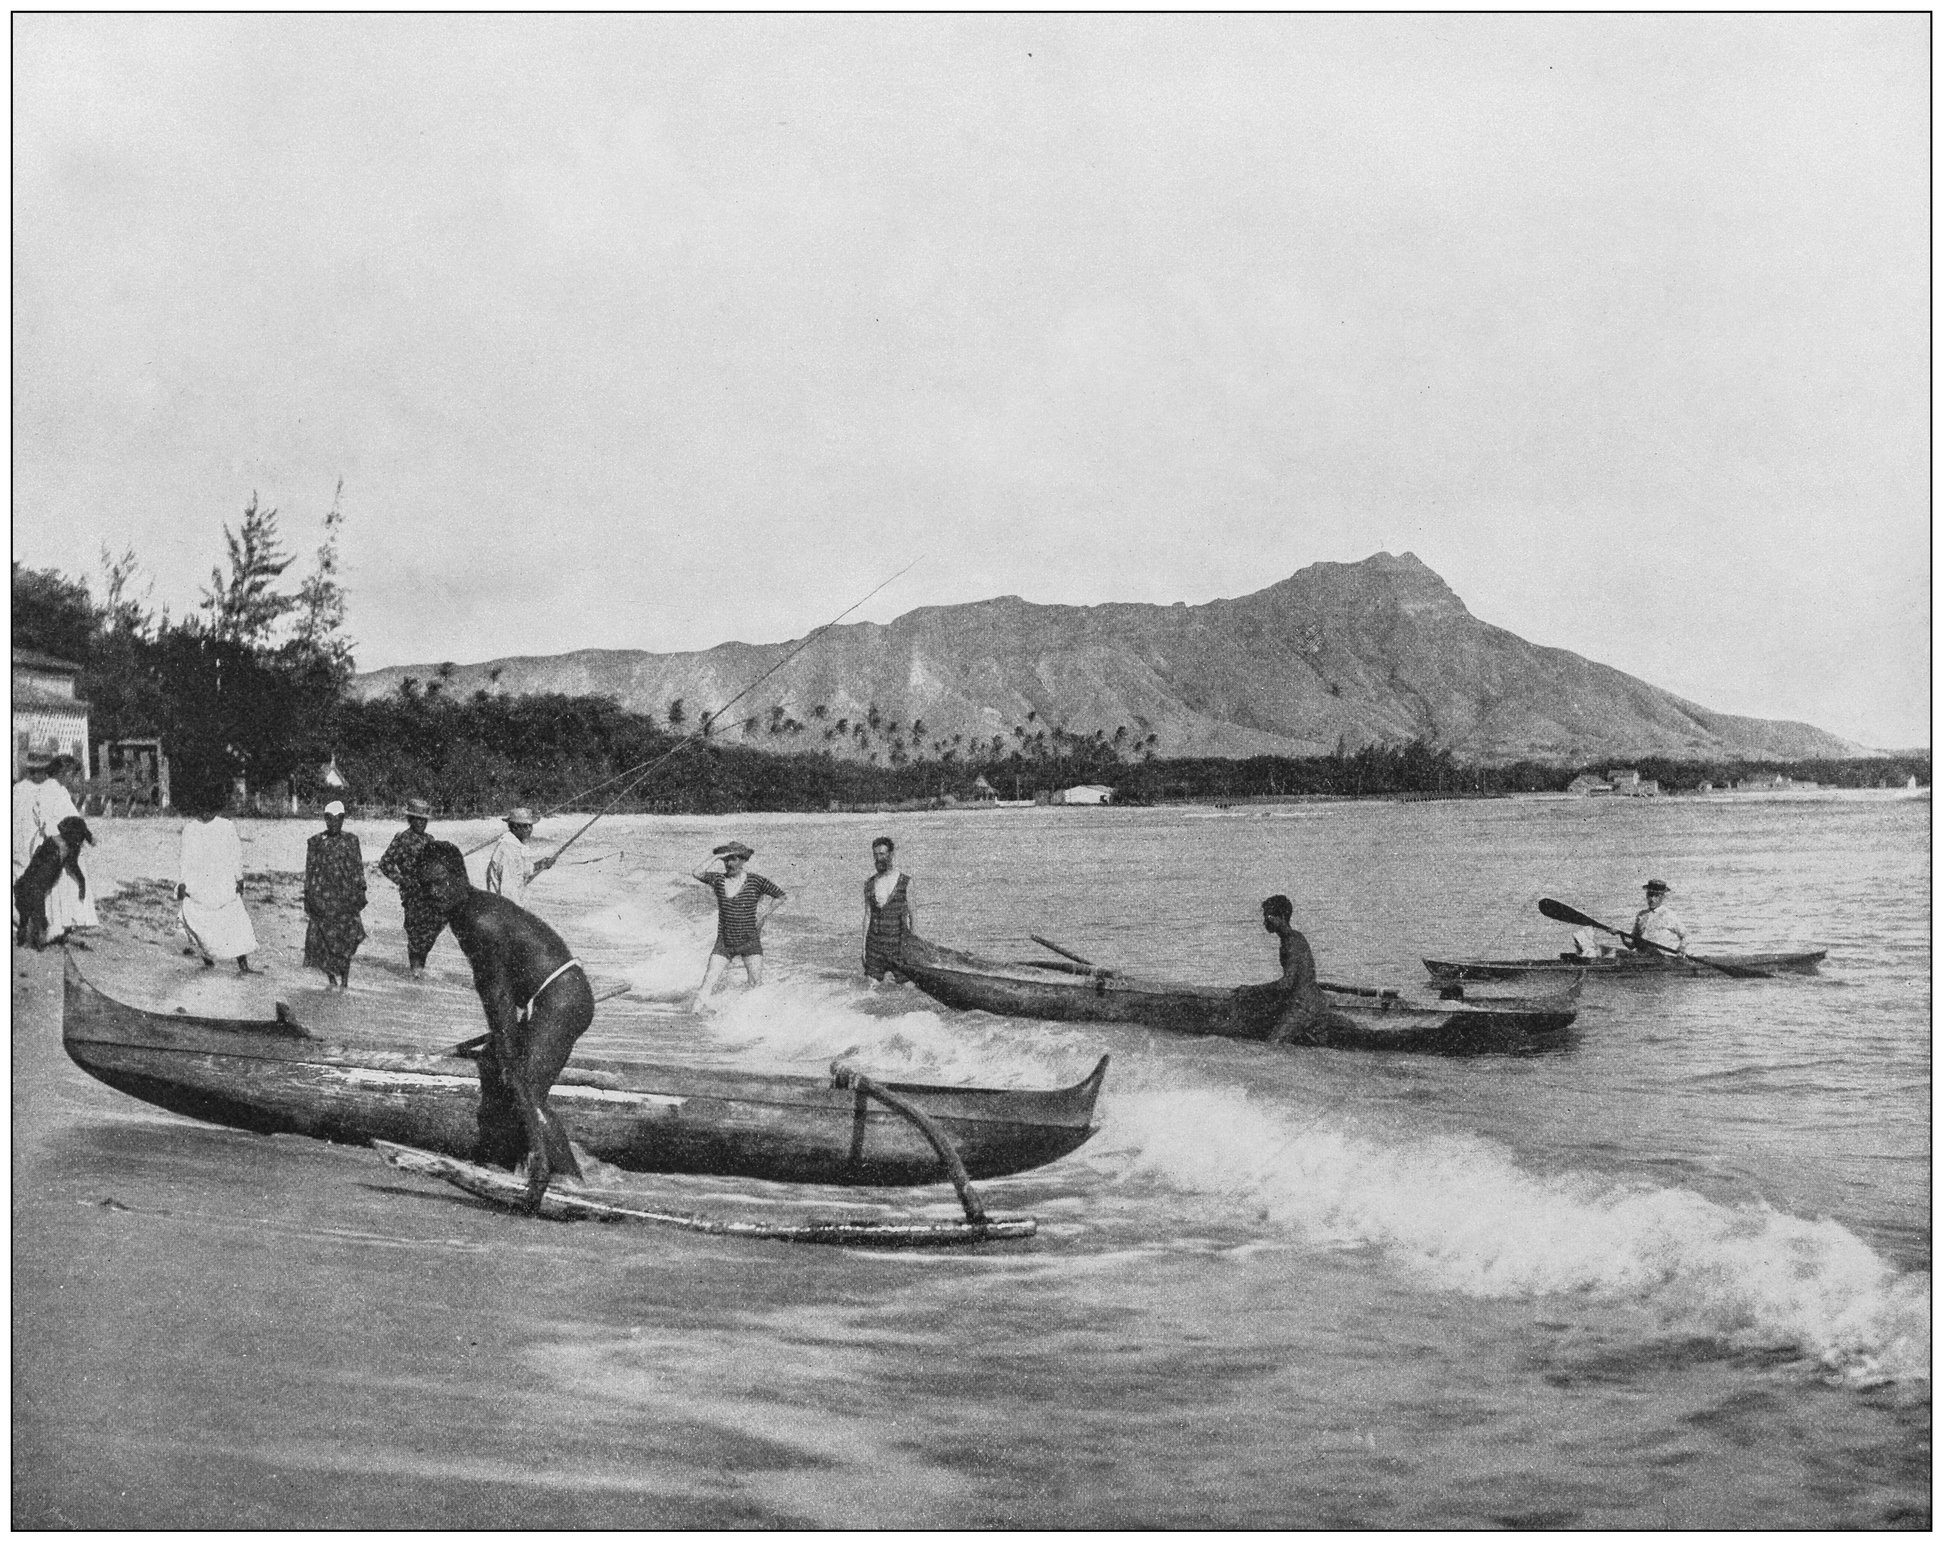 A historical photo of canoes in Hawaii